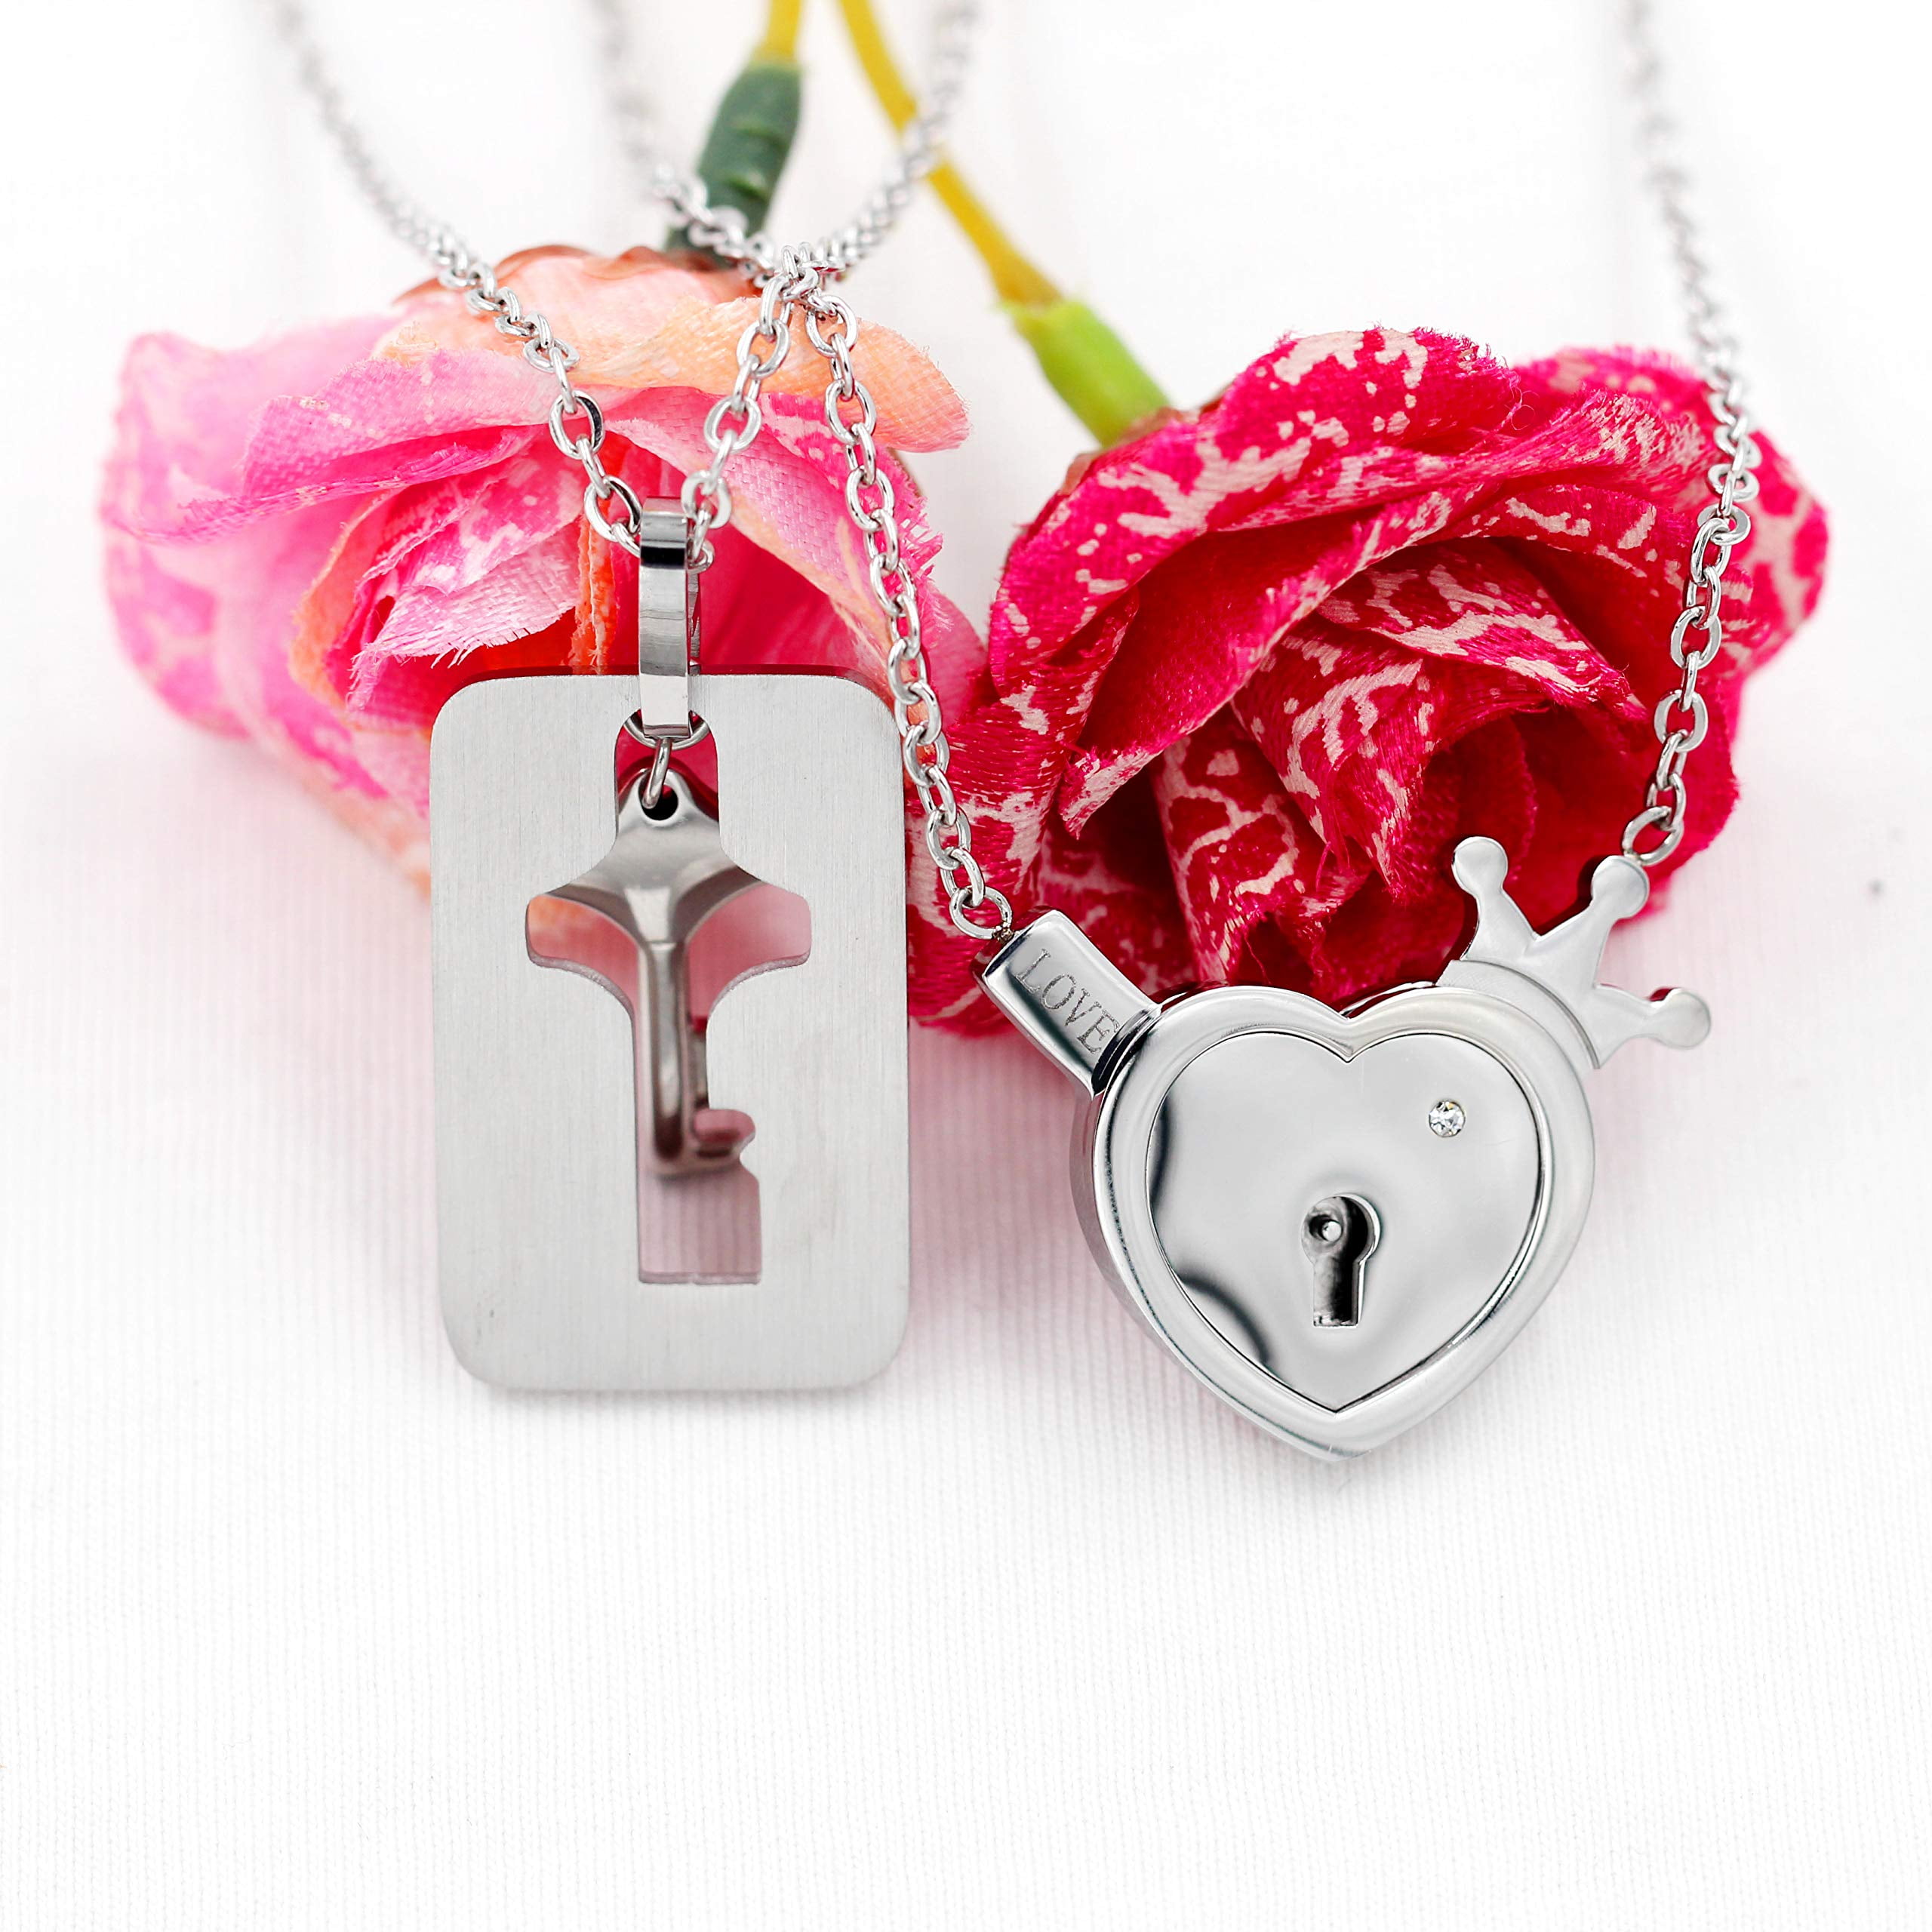 Heart Lock Necklace - Heart Lock and Key Necklace